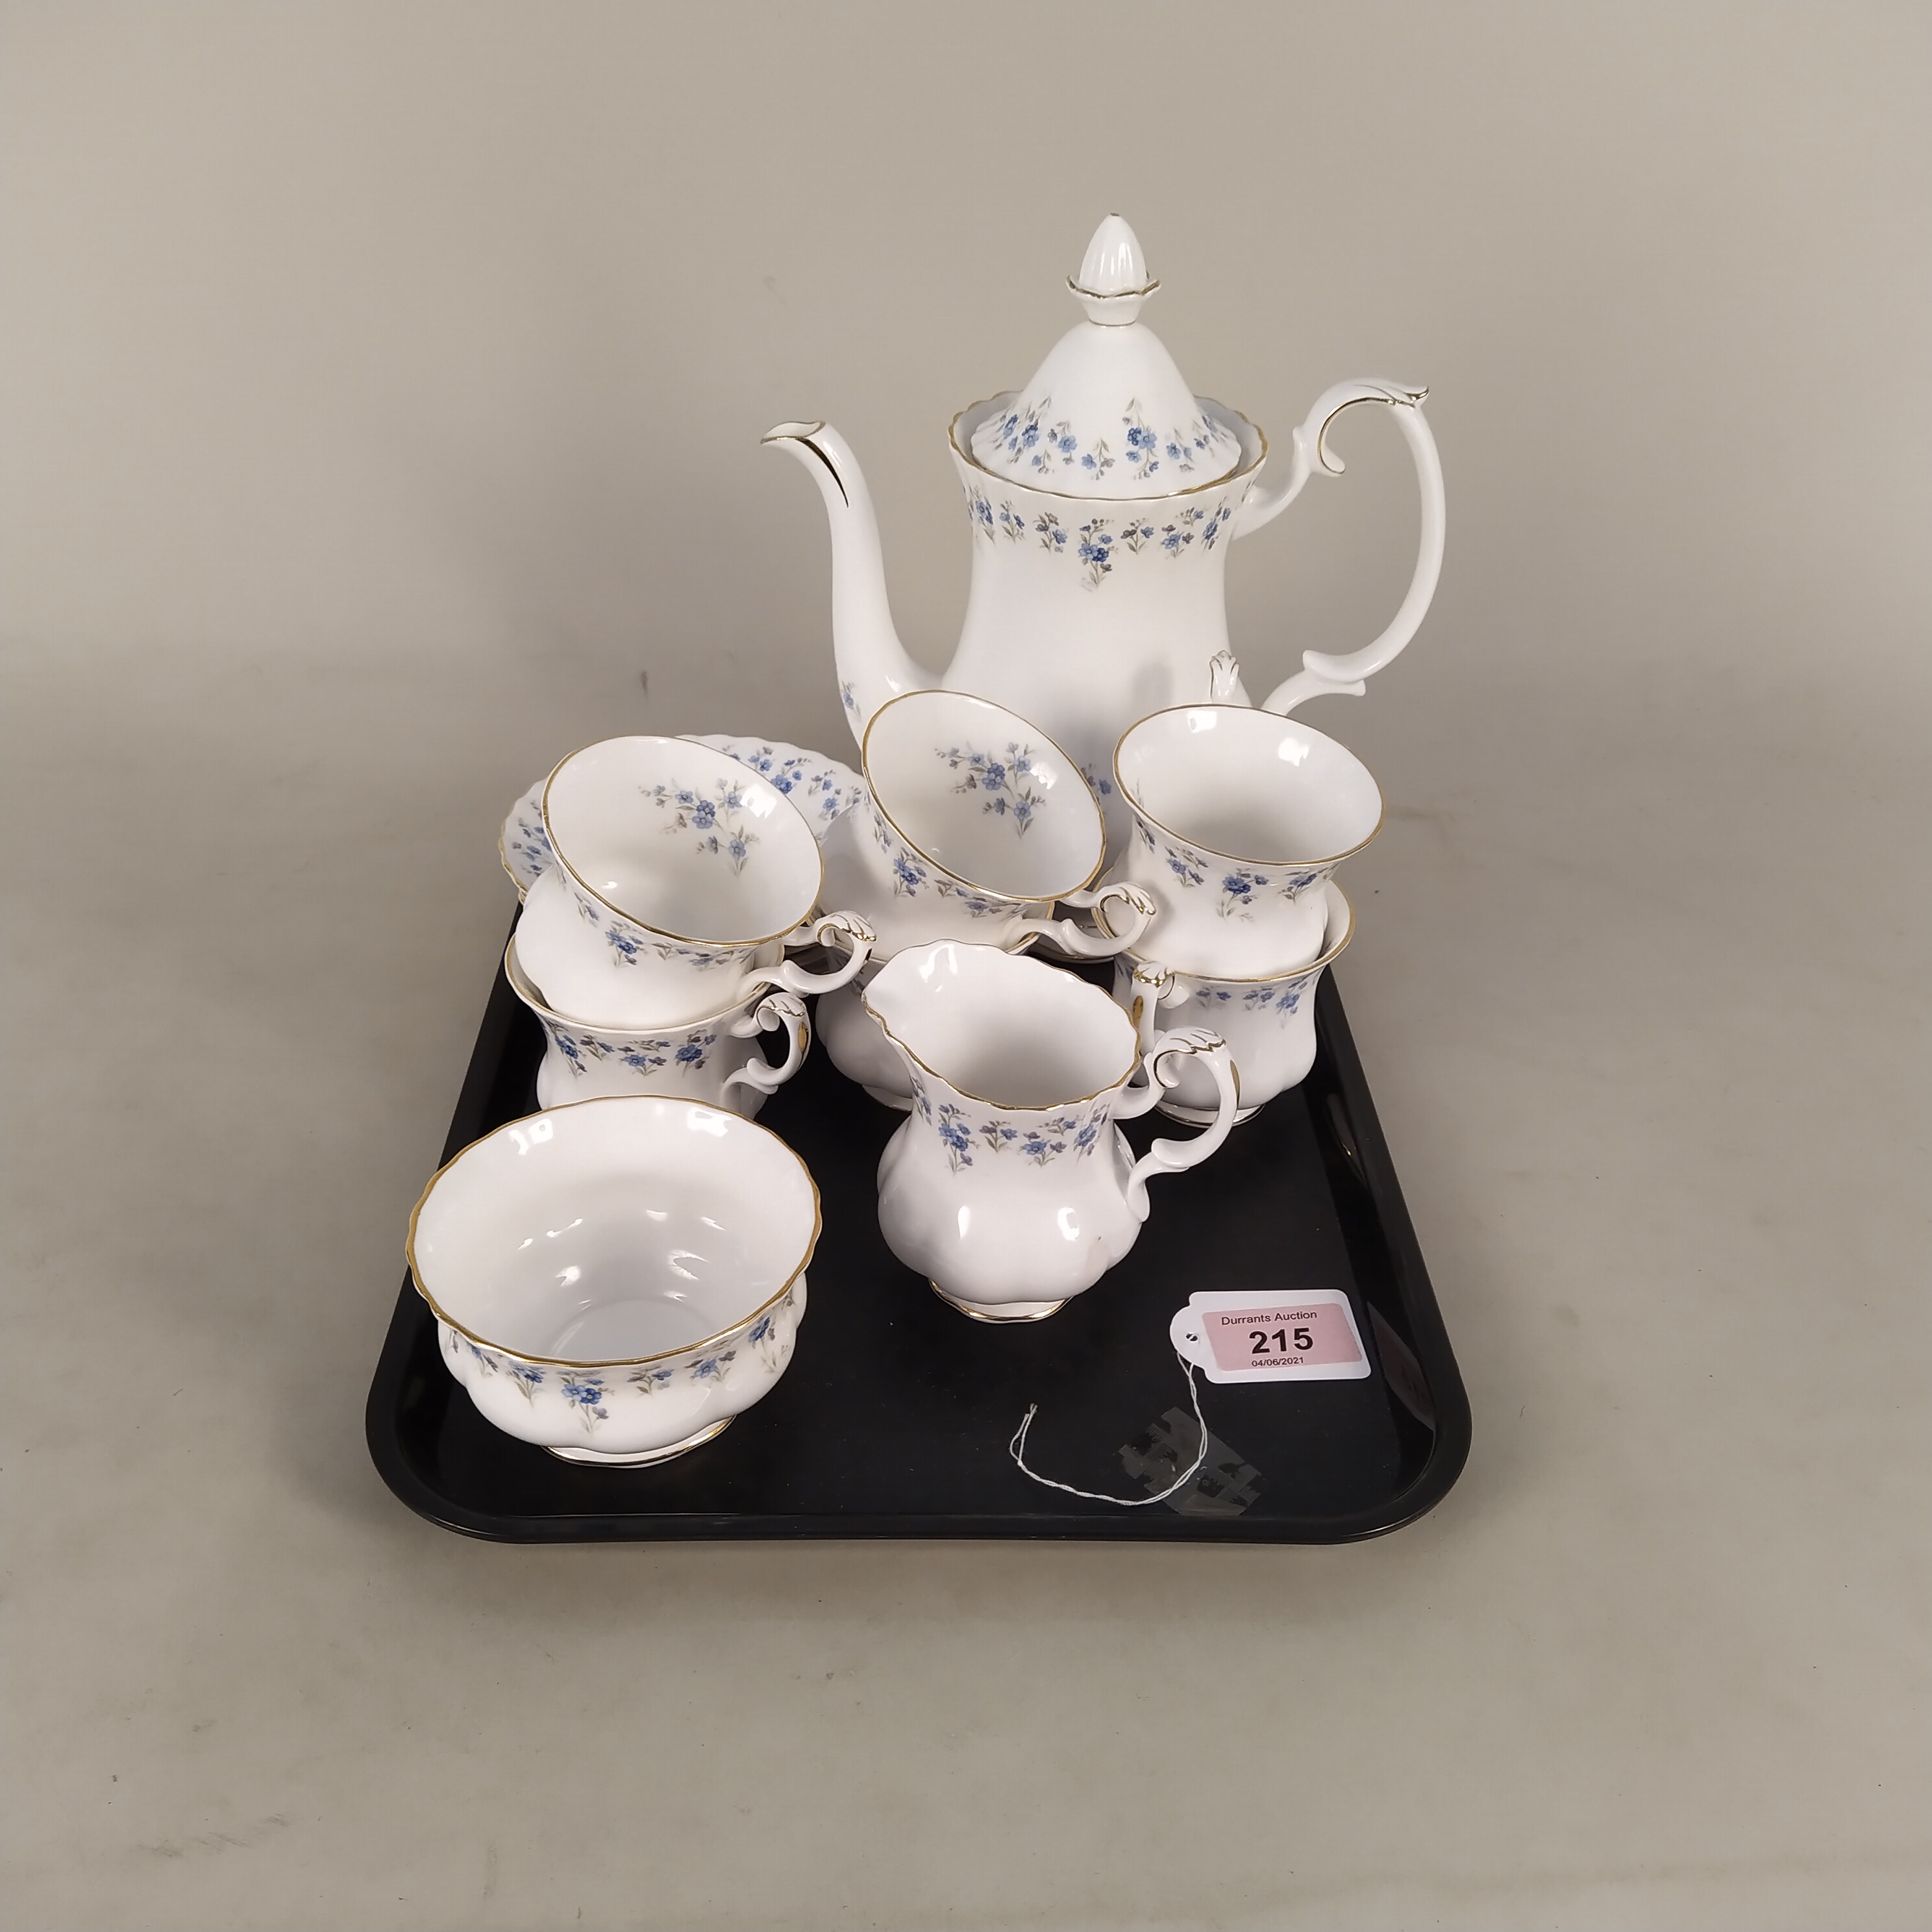 Royal Albert 'Memory Lane' pattern tea service including a teapot, six cups and saucers,